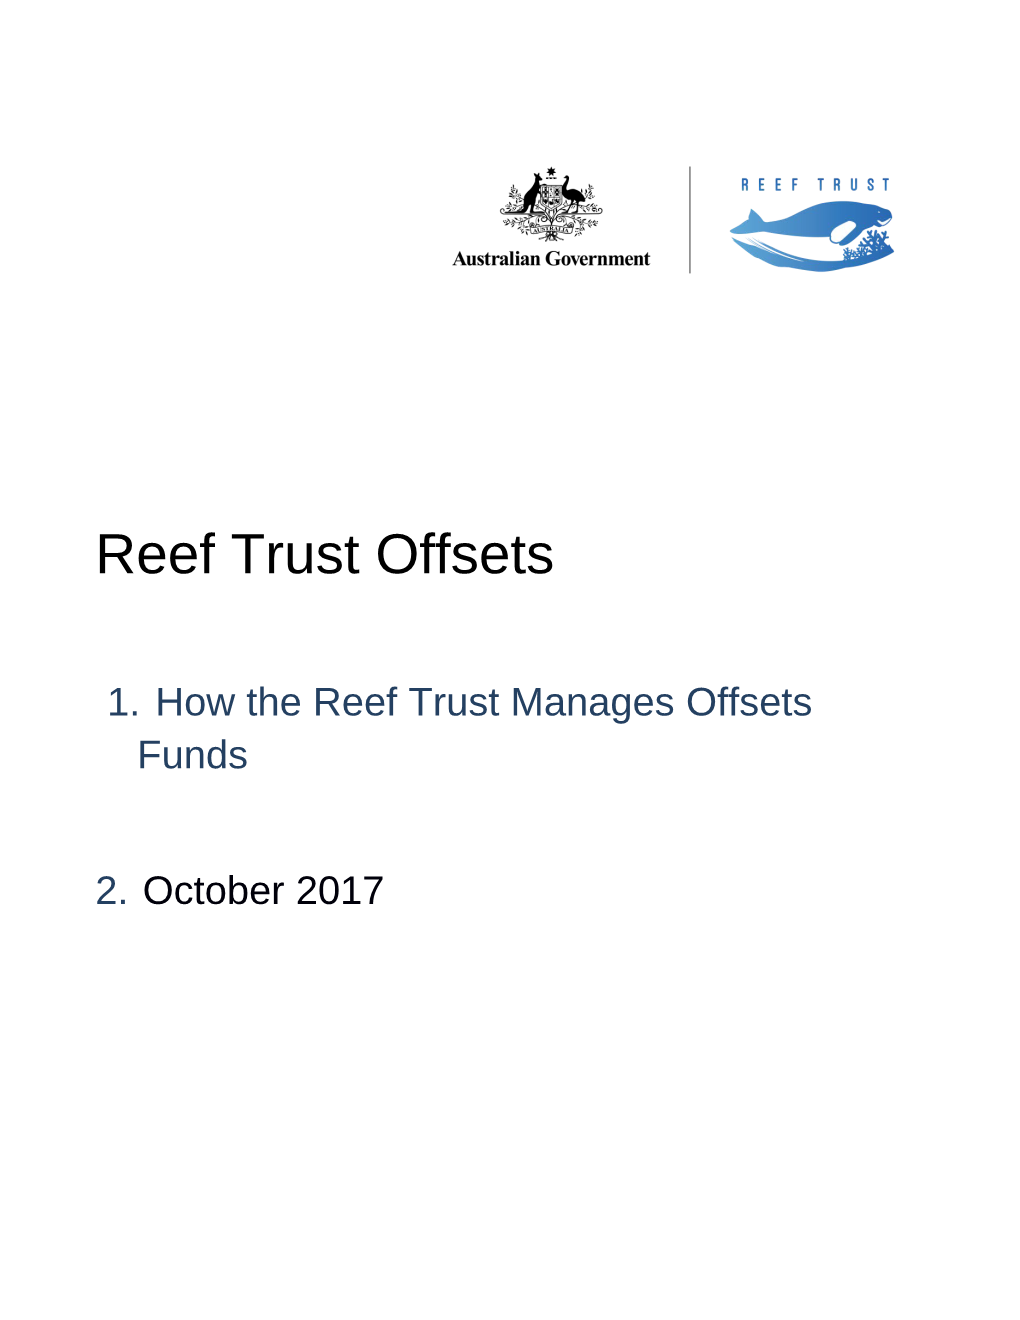 Reef Trust Offsets - How the Reef Trust Manages Offsets Funds OCTOBER 2017